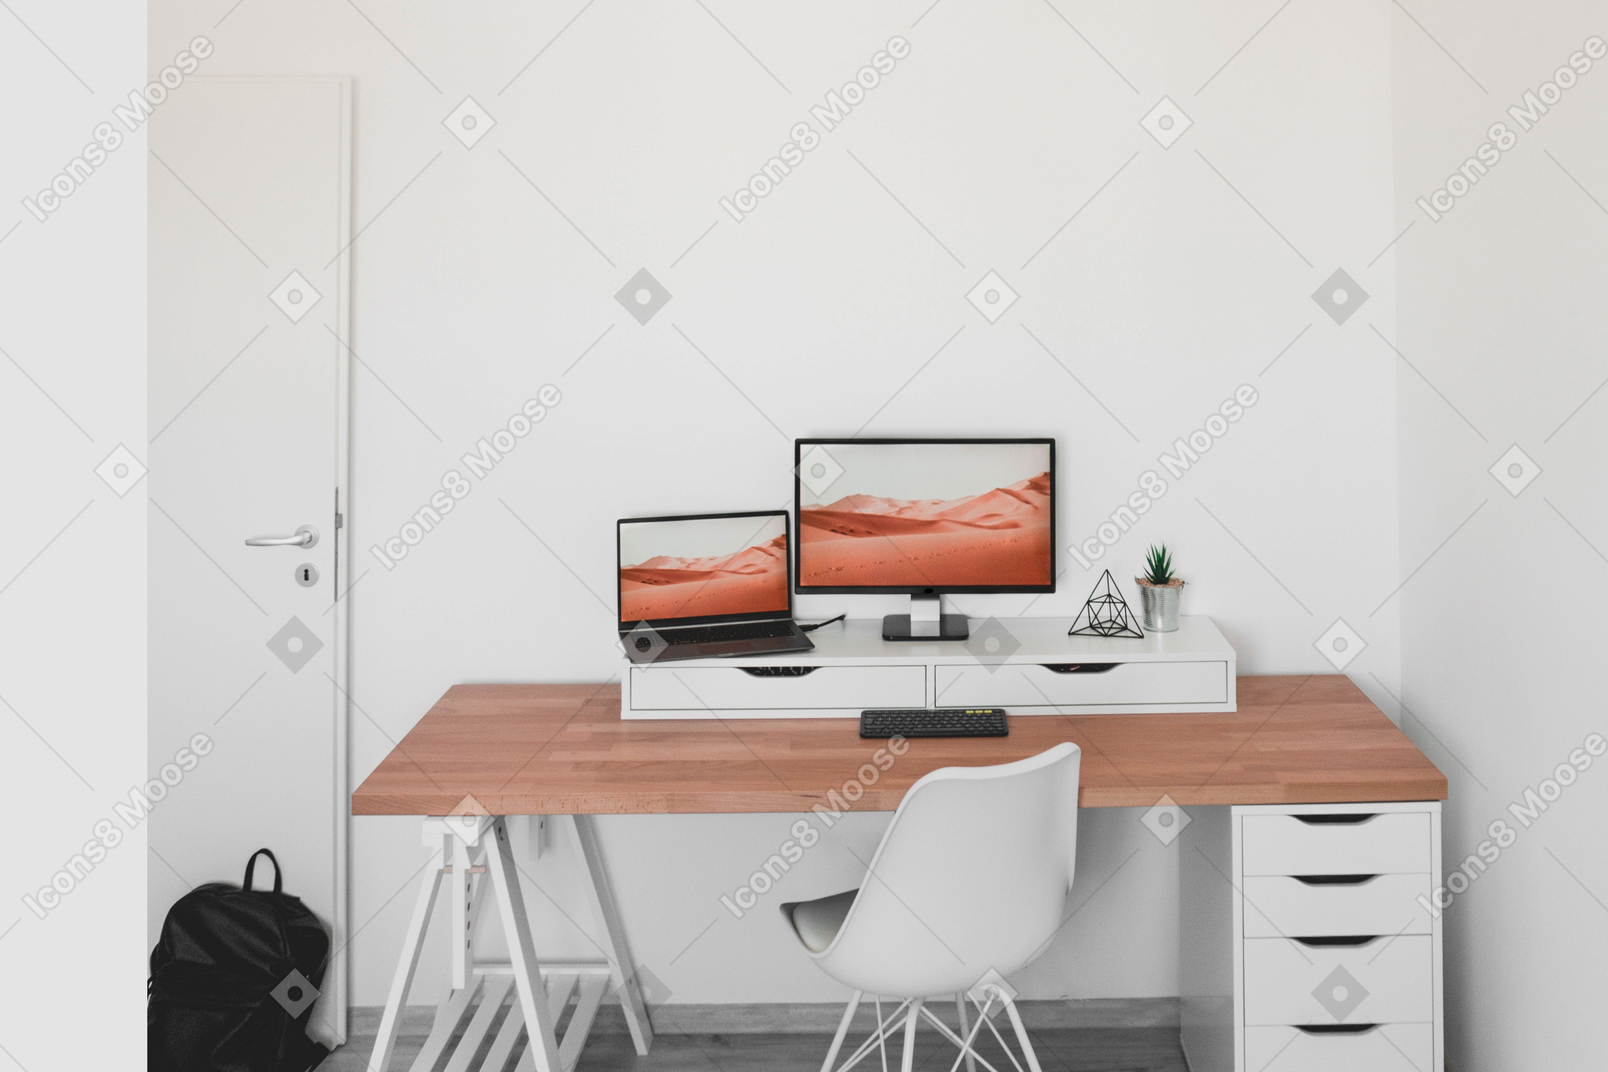 A wall mounted desk in the living room